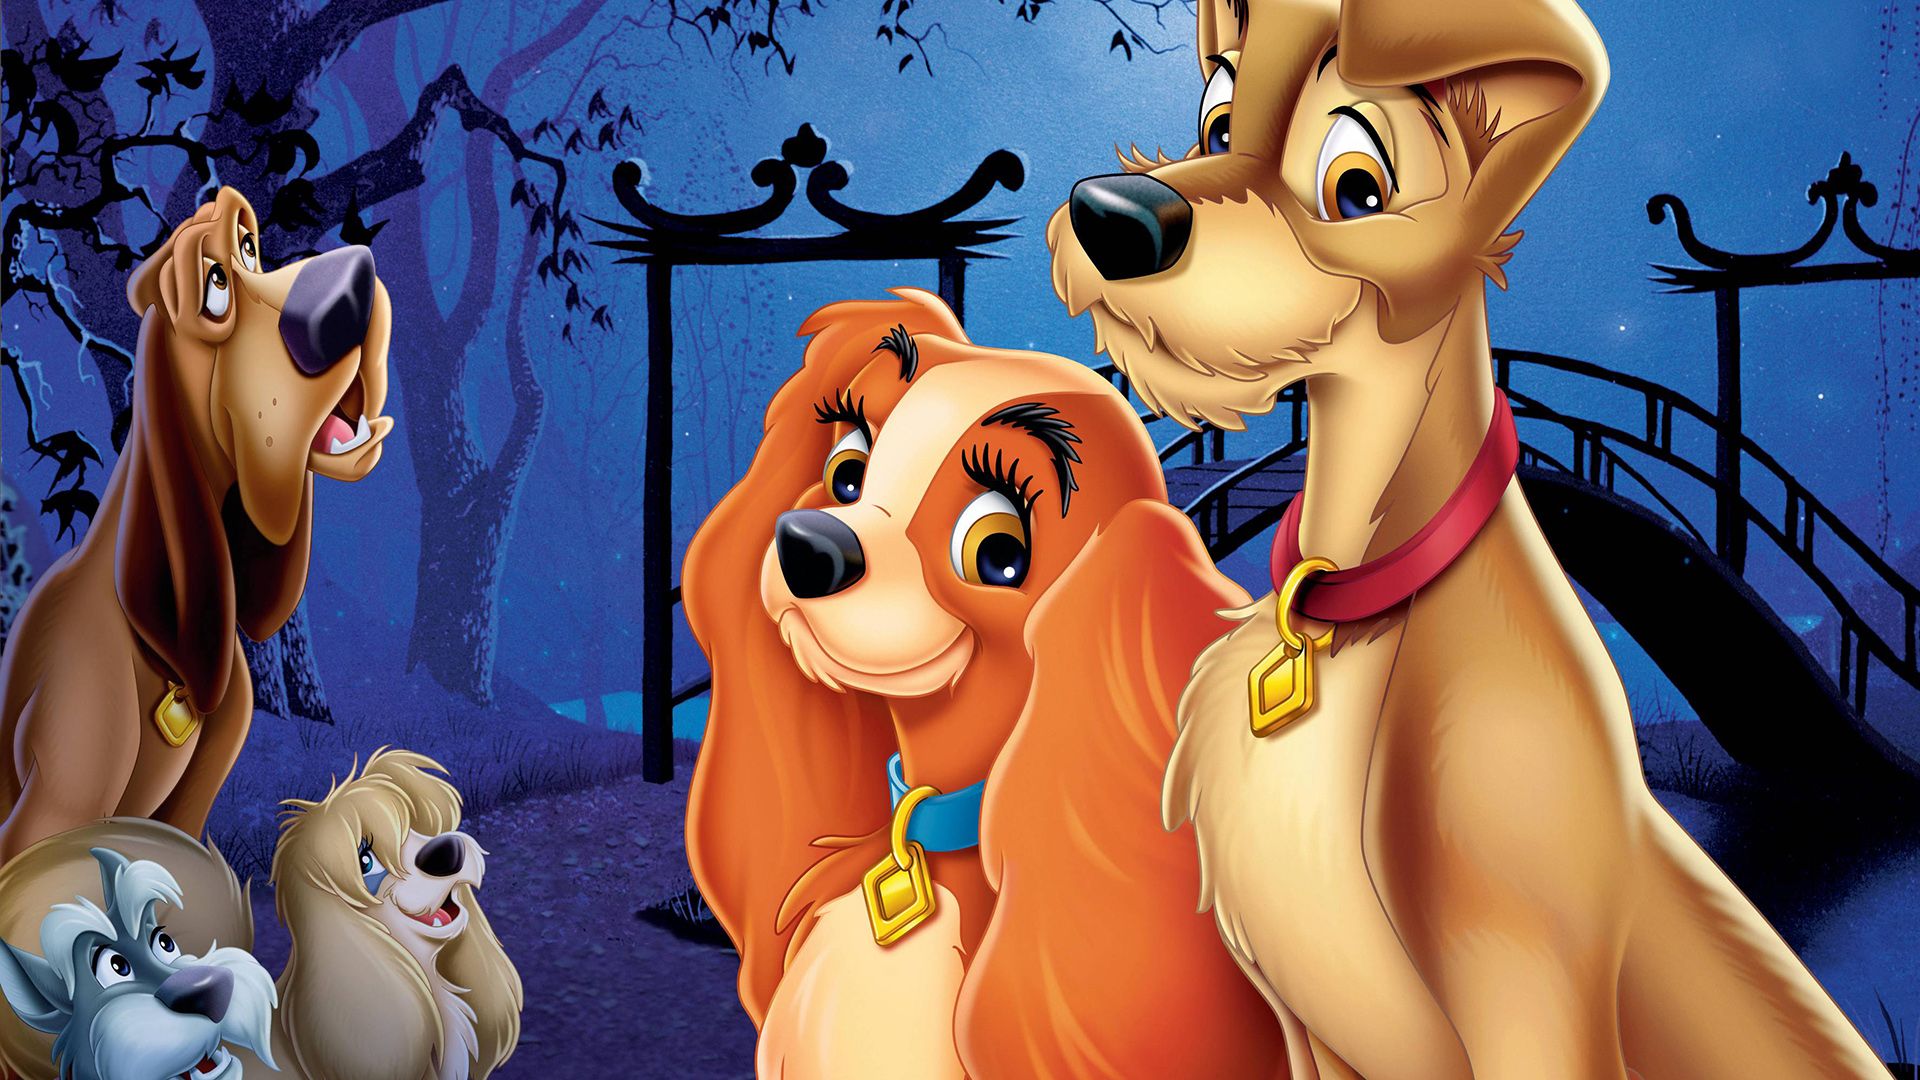 Lady and the Tramp background